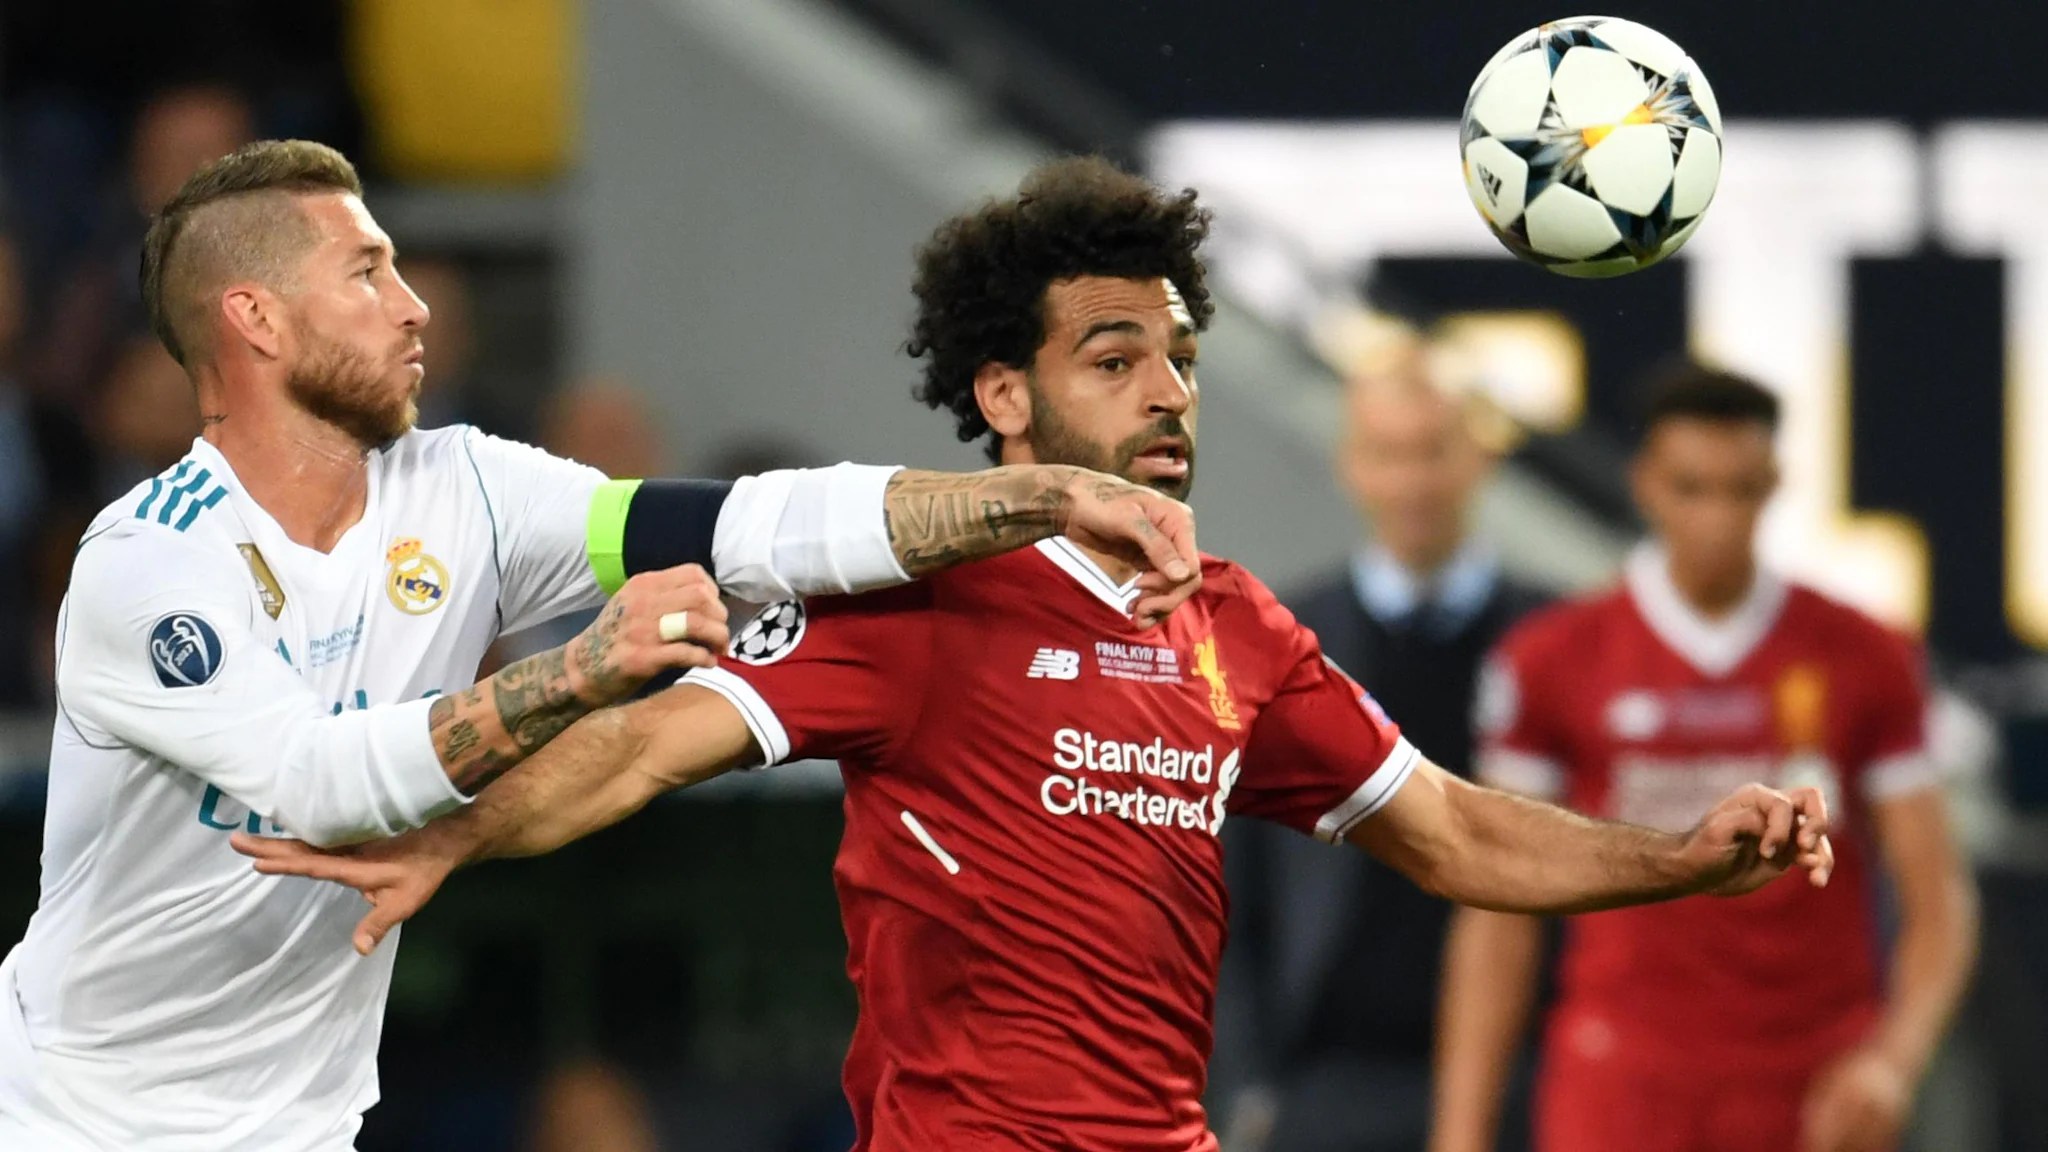 Champions League FINAL 2022: All you need to know about Liverpool vs Real Madrid, UEFA Champions League FINAL: Date, Venue, Live Streaming, Tickets and more